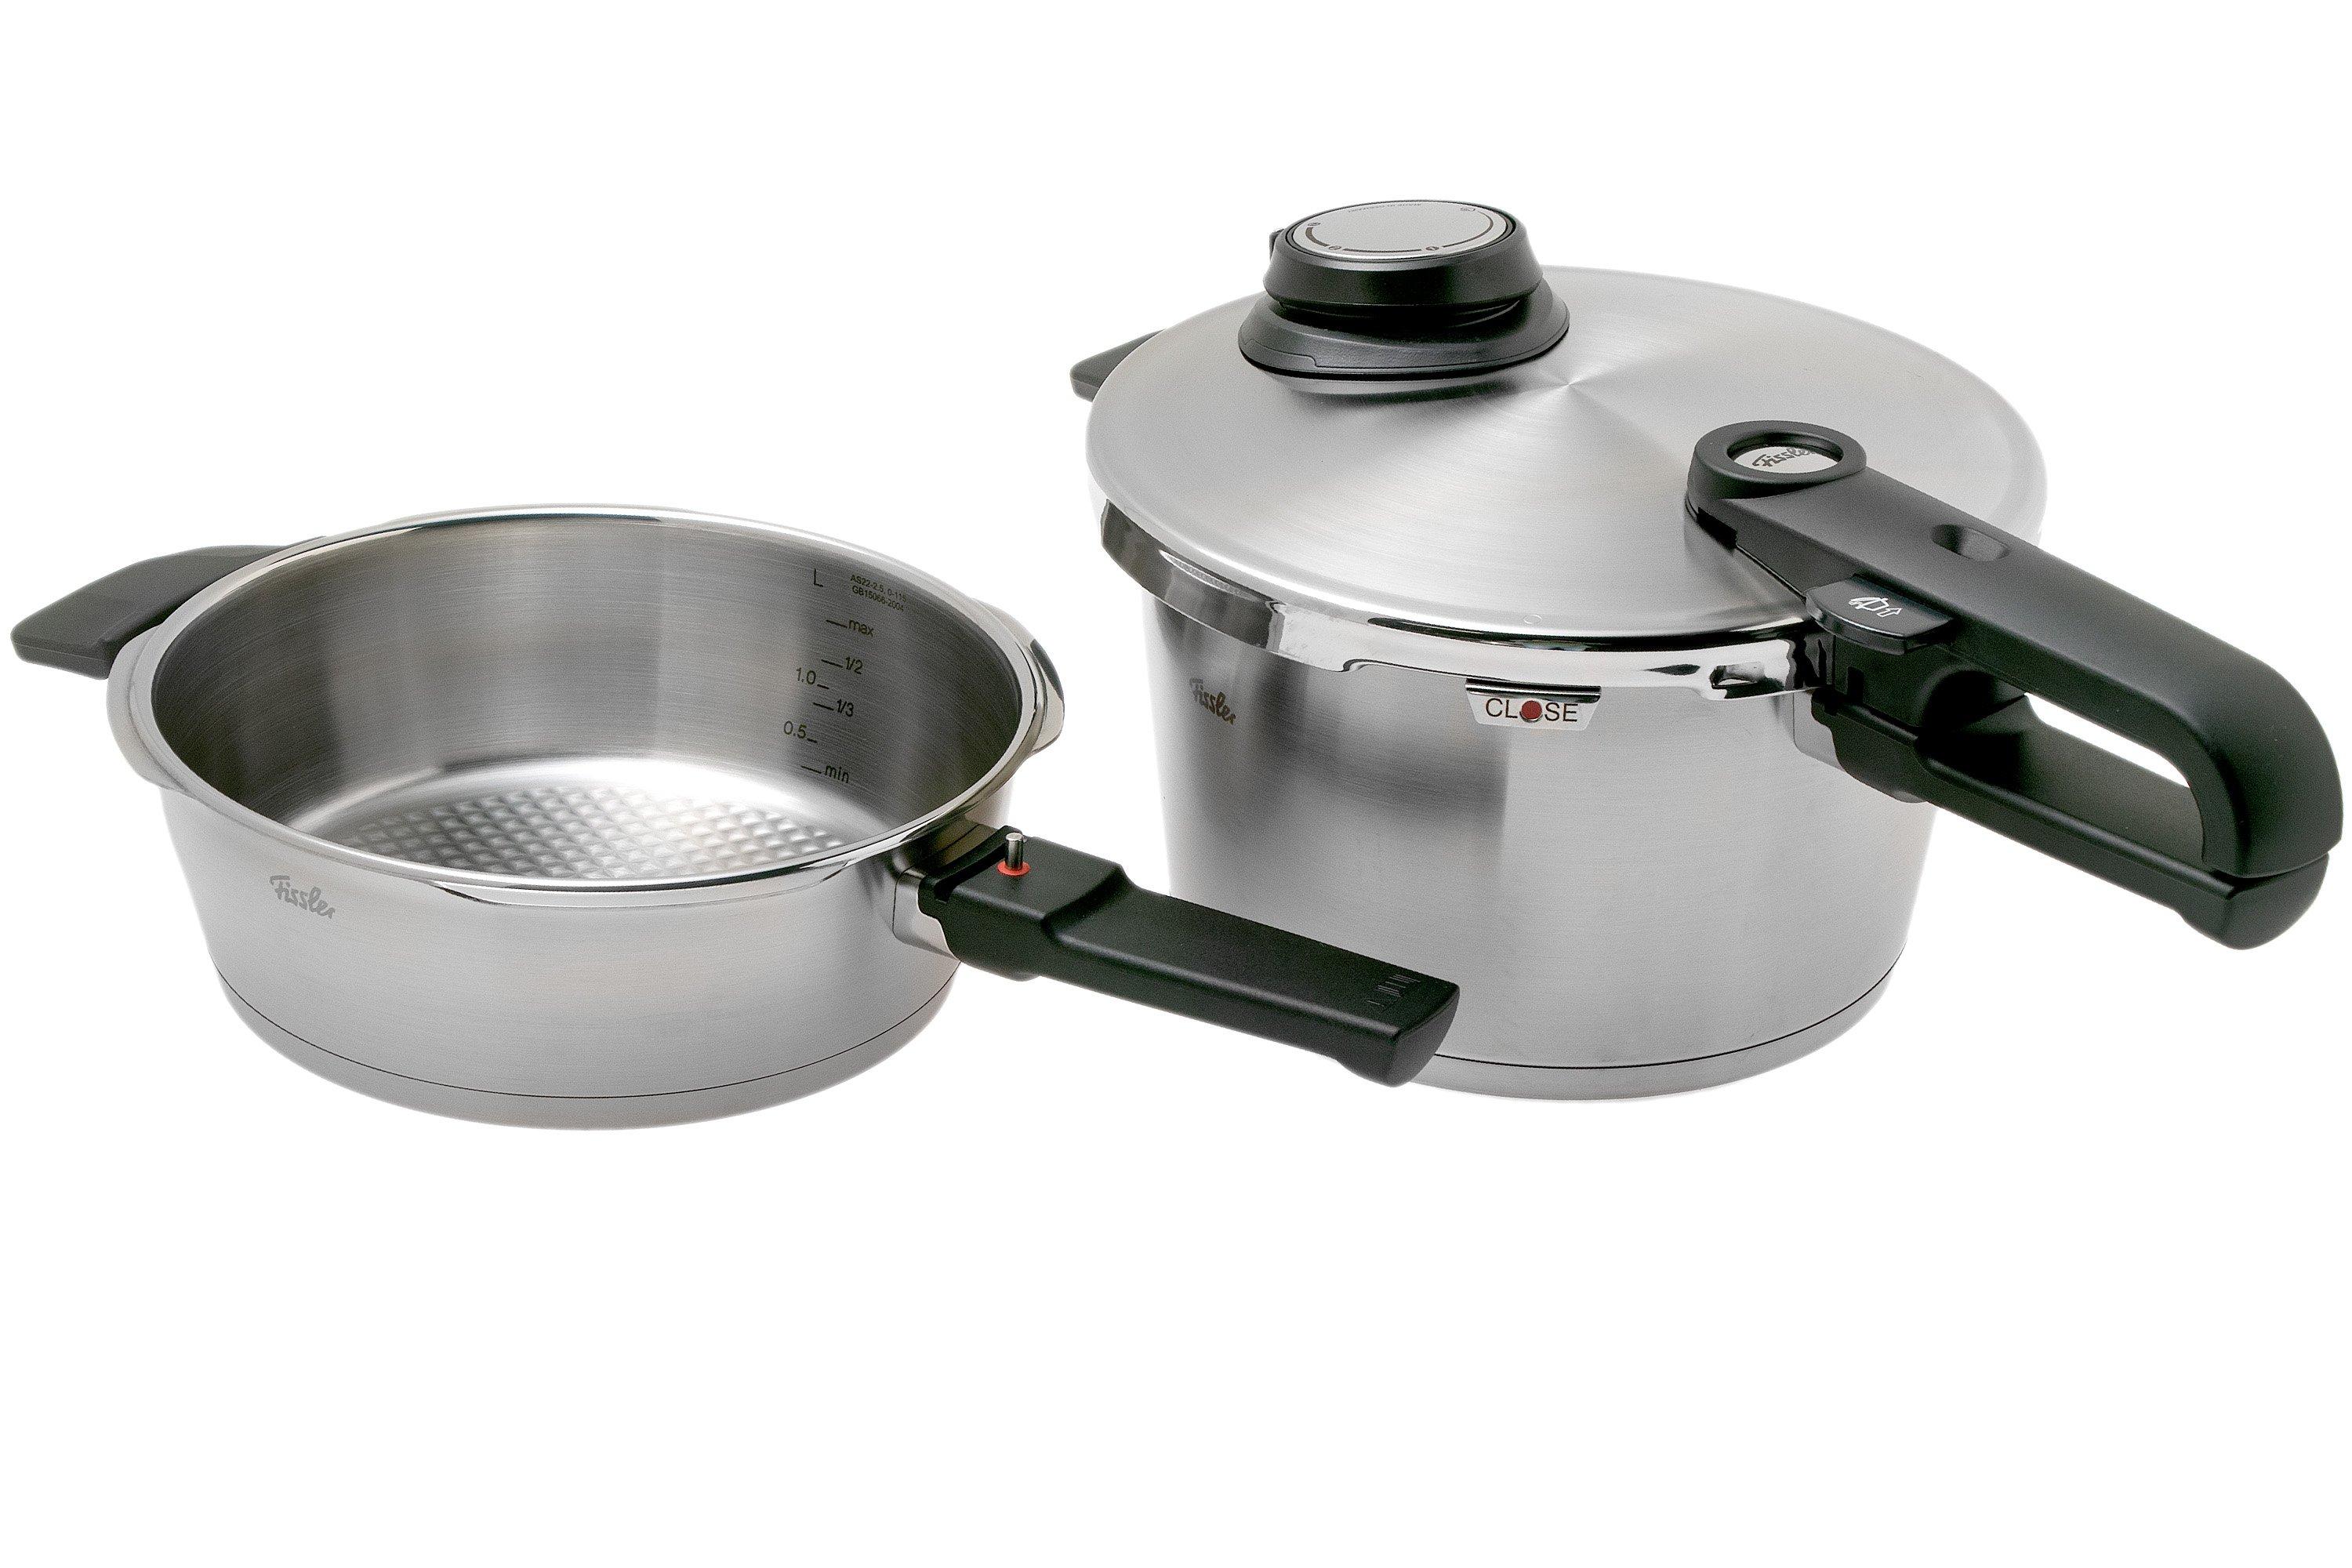 Fissler Vitaquick pressure cooker 4,5 l  Advantageously shopping at